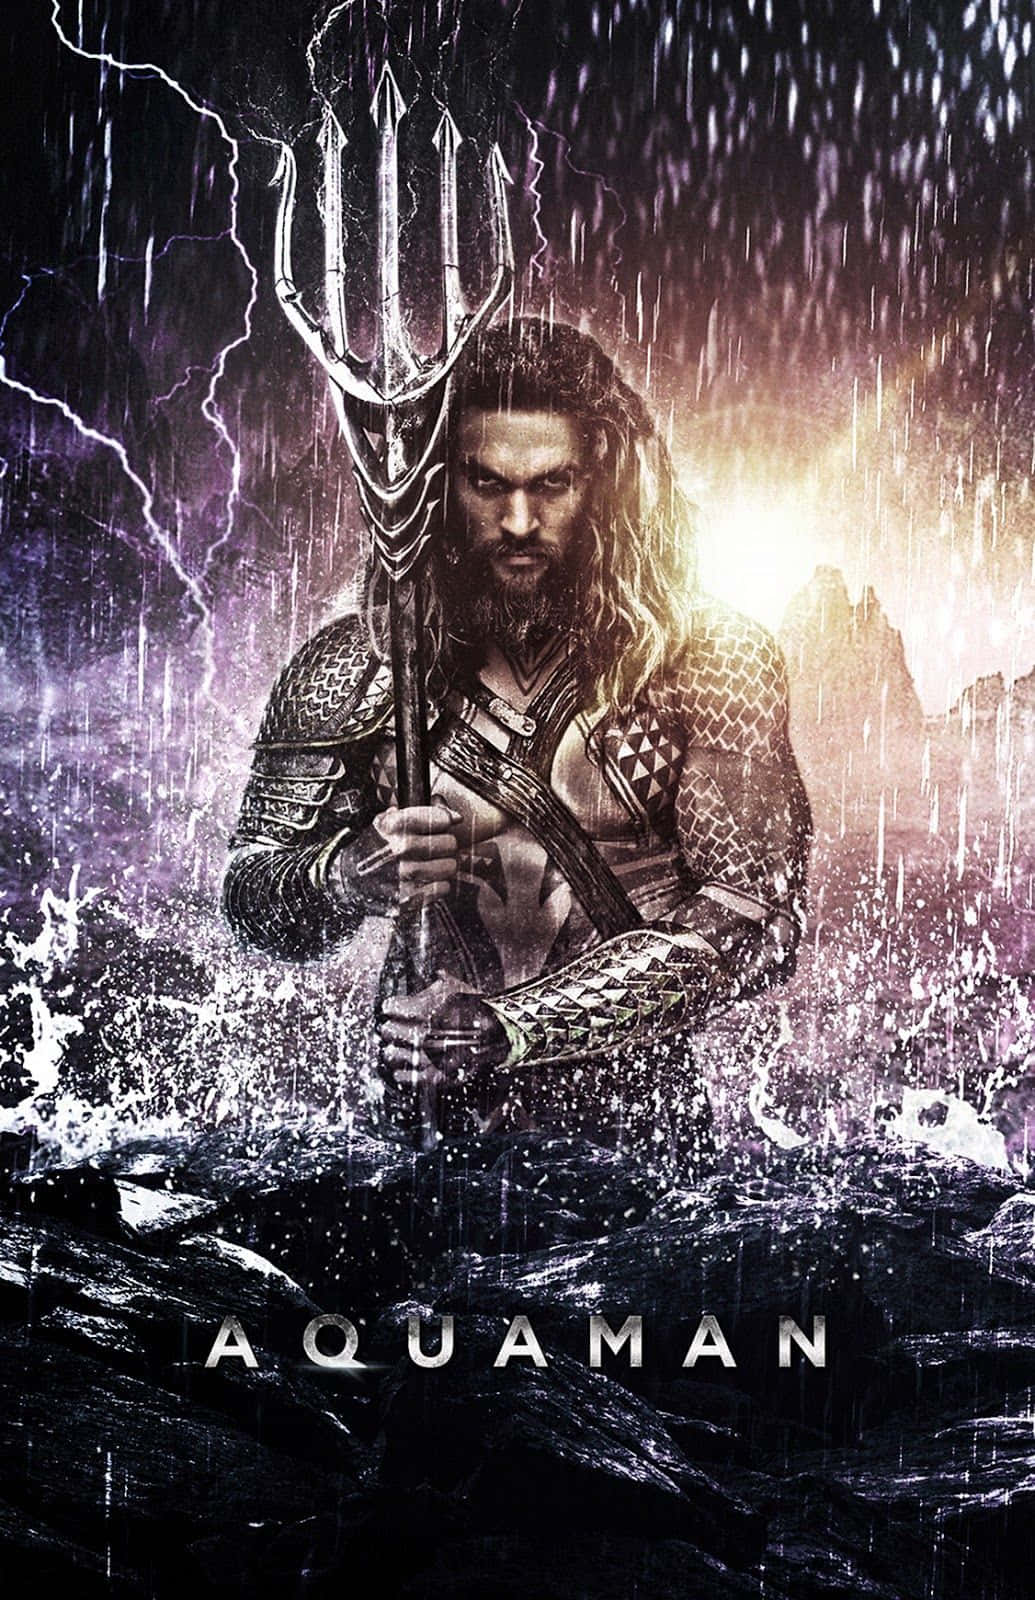 "Aquaman fights for the galaxy on the high seas!"